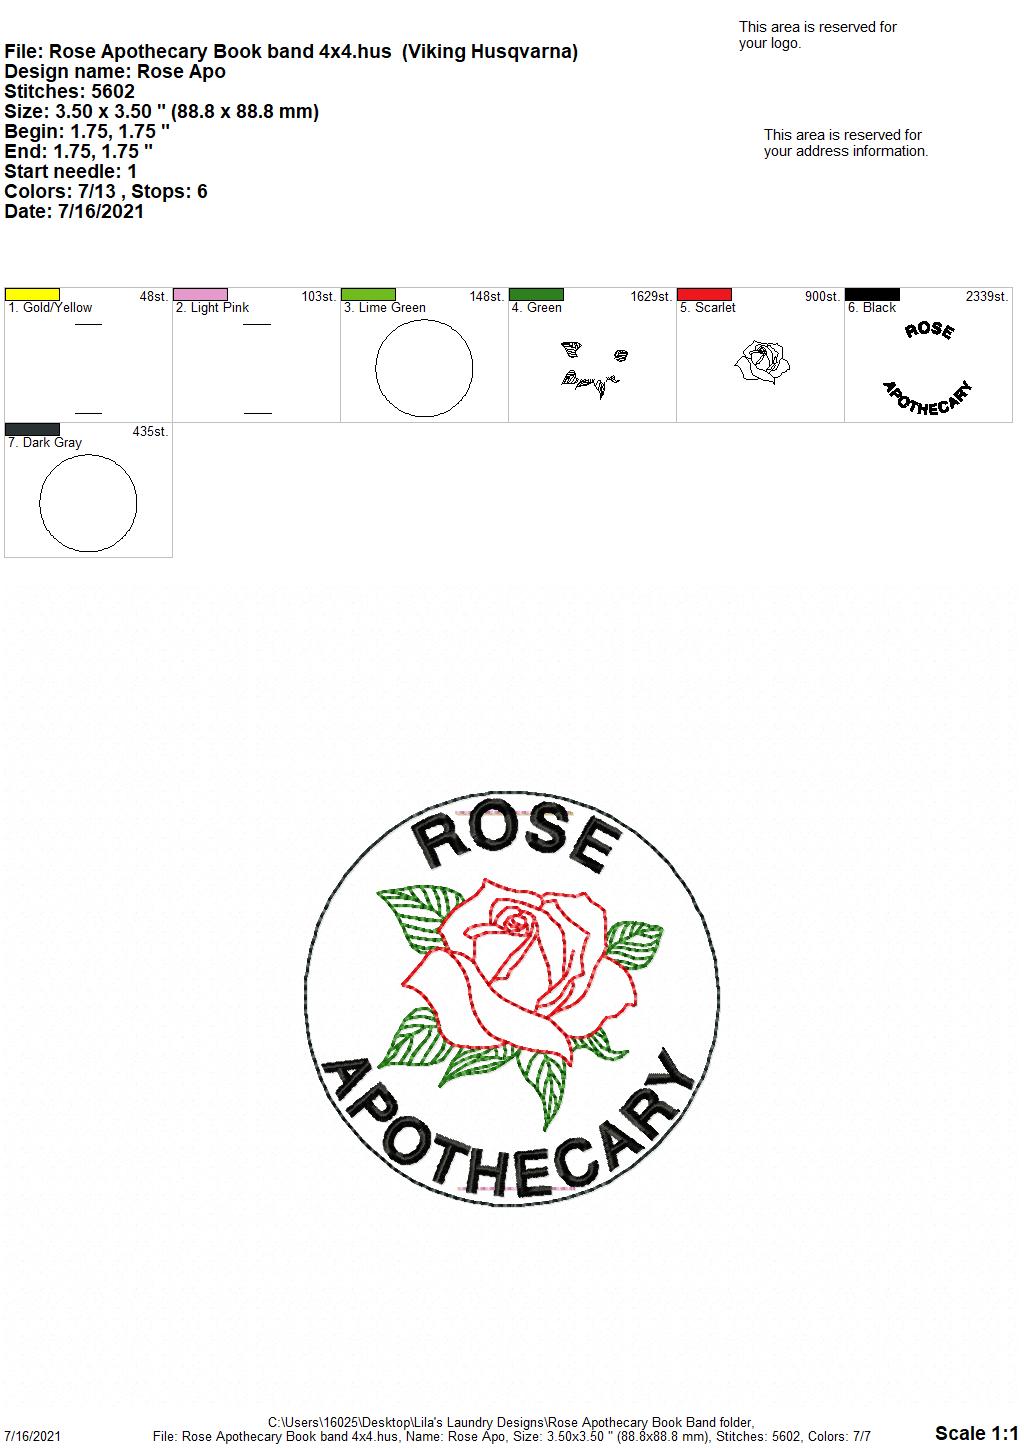 Rose Apothecary Book Band - Embroidery Design, Digital File